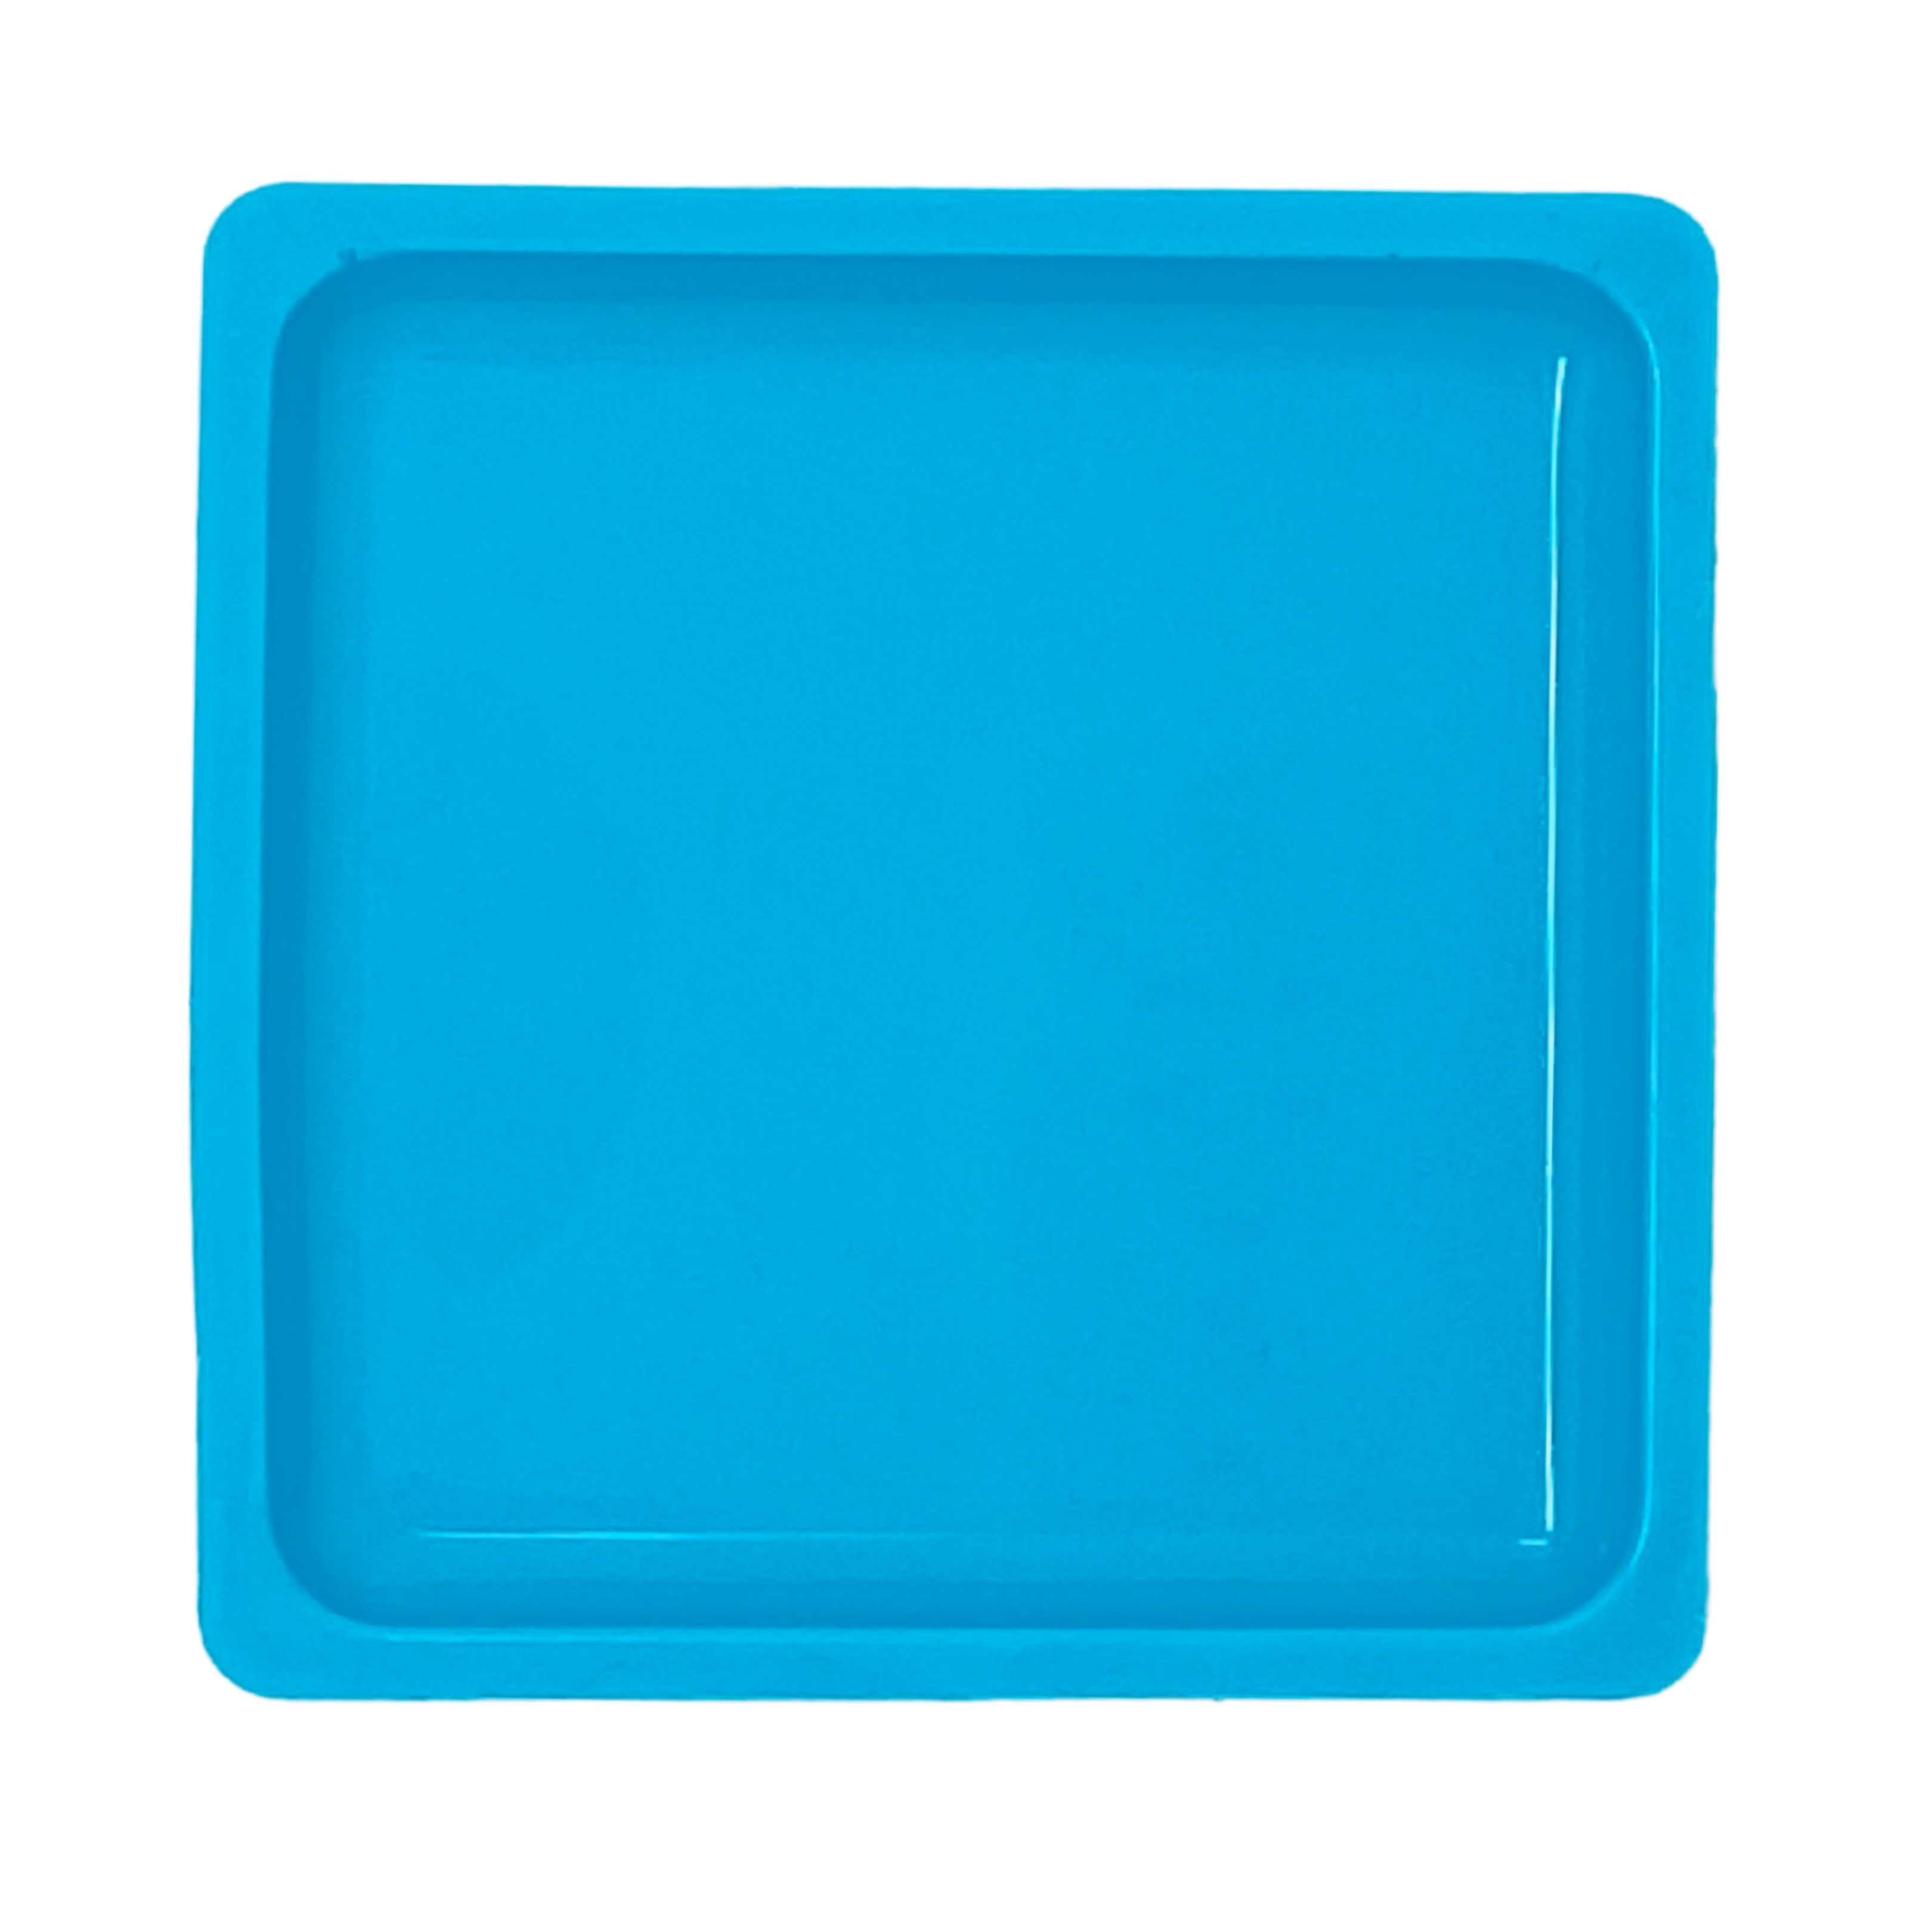 4 Inch Square Coaster Mould - The Mould Story